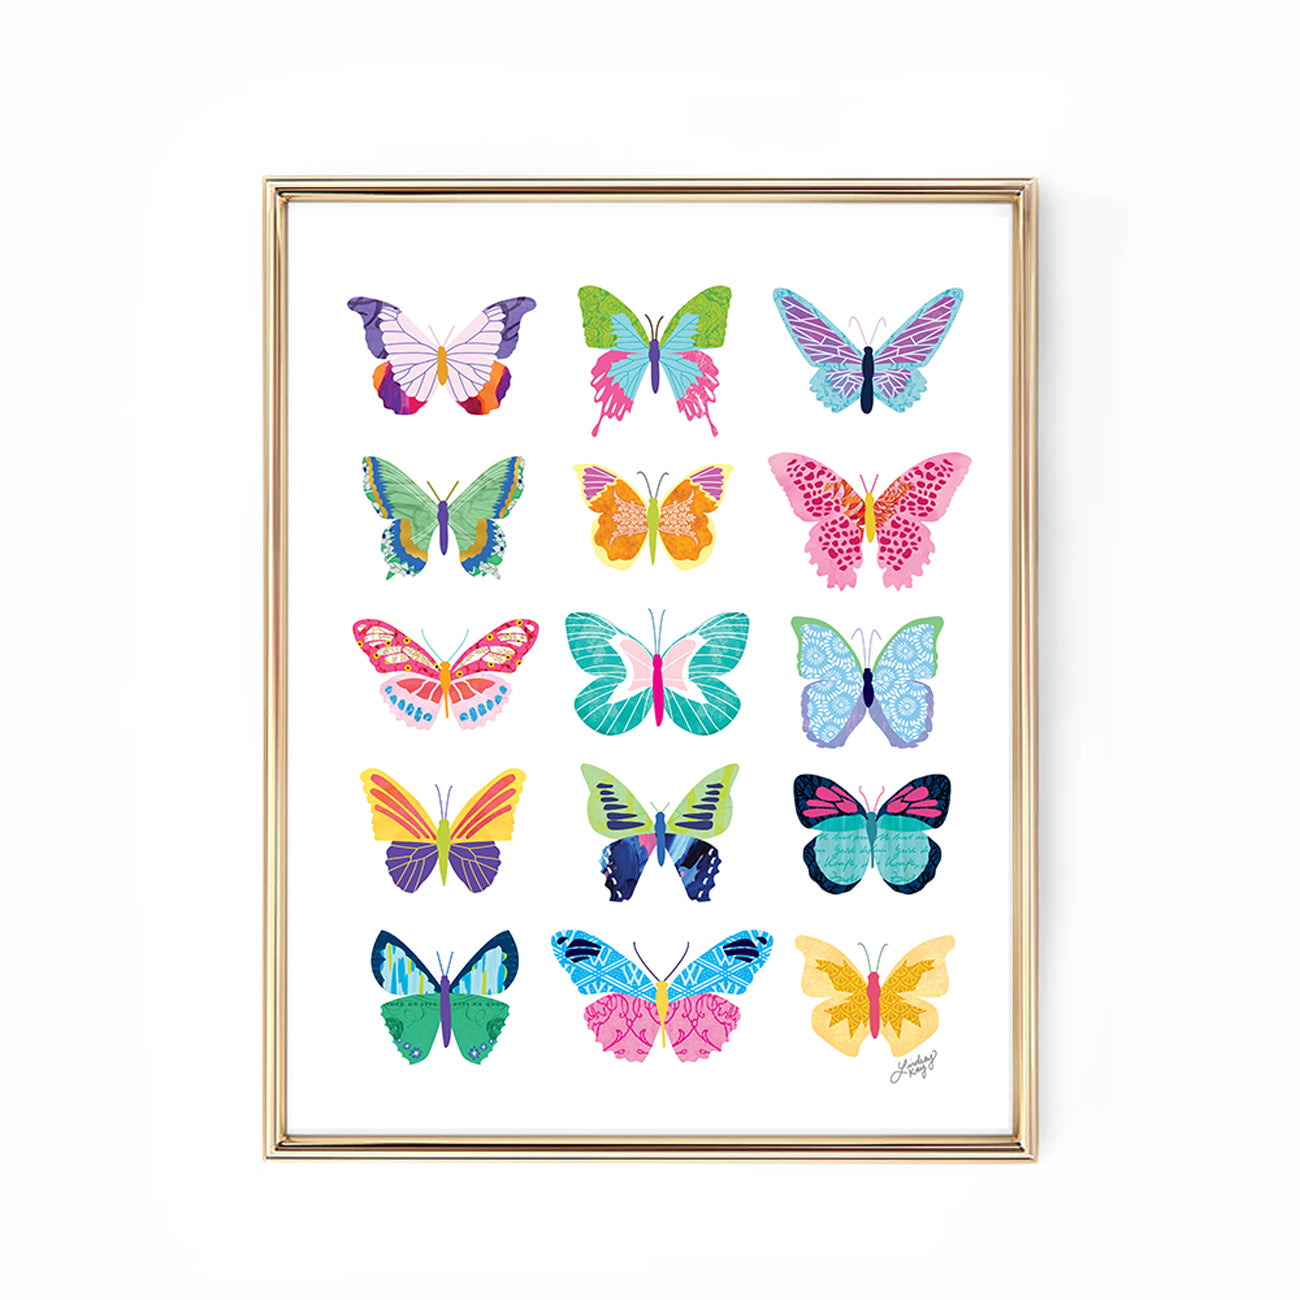 colorful butterflies collage illustration art print design wall art lindsey kay collective